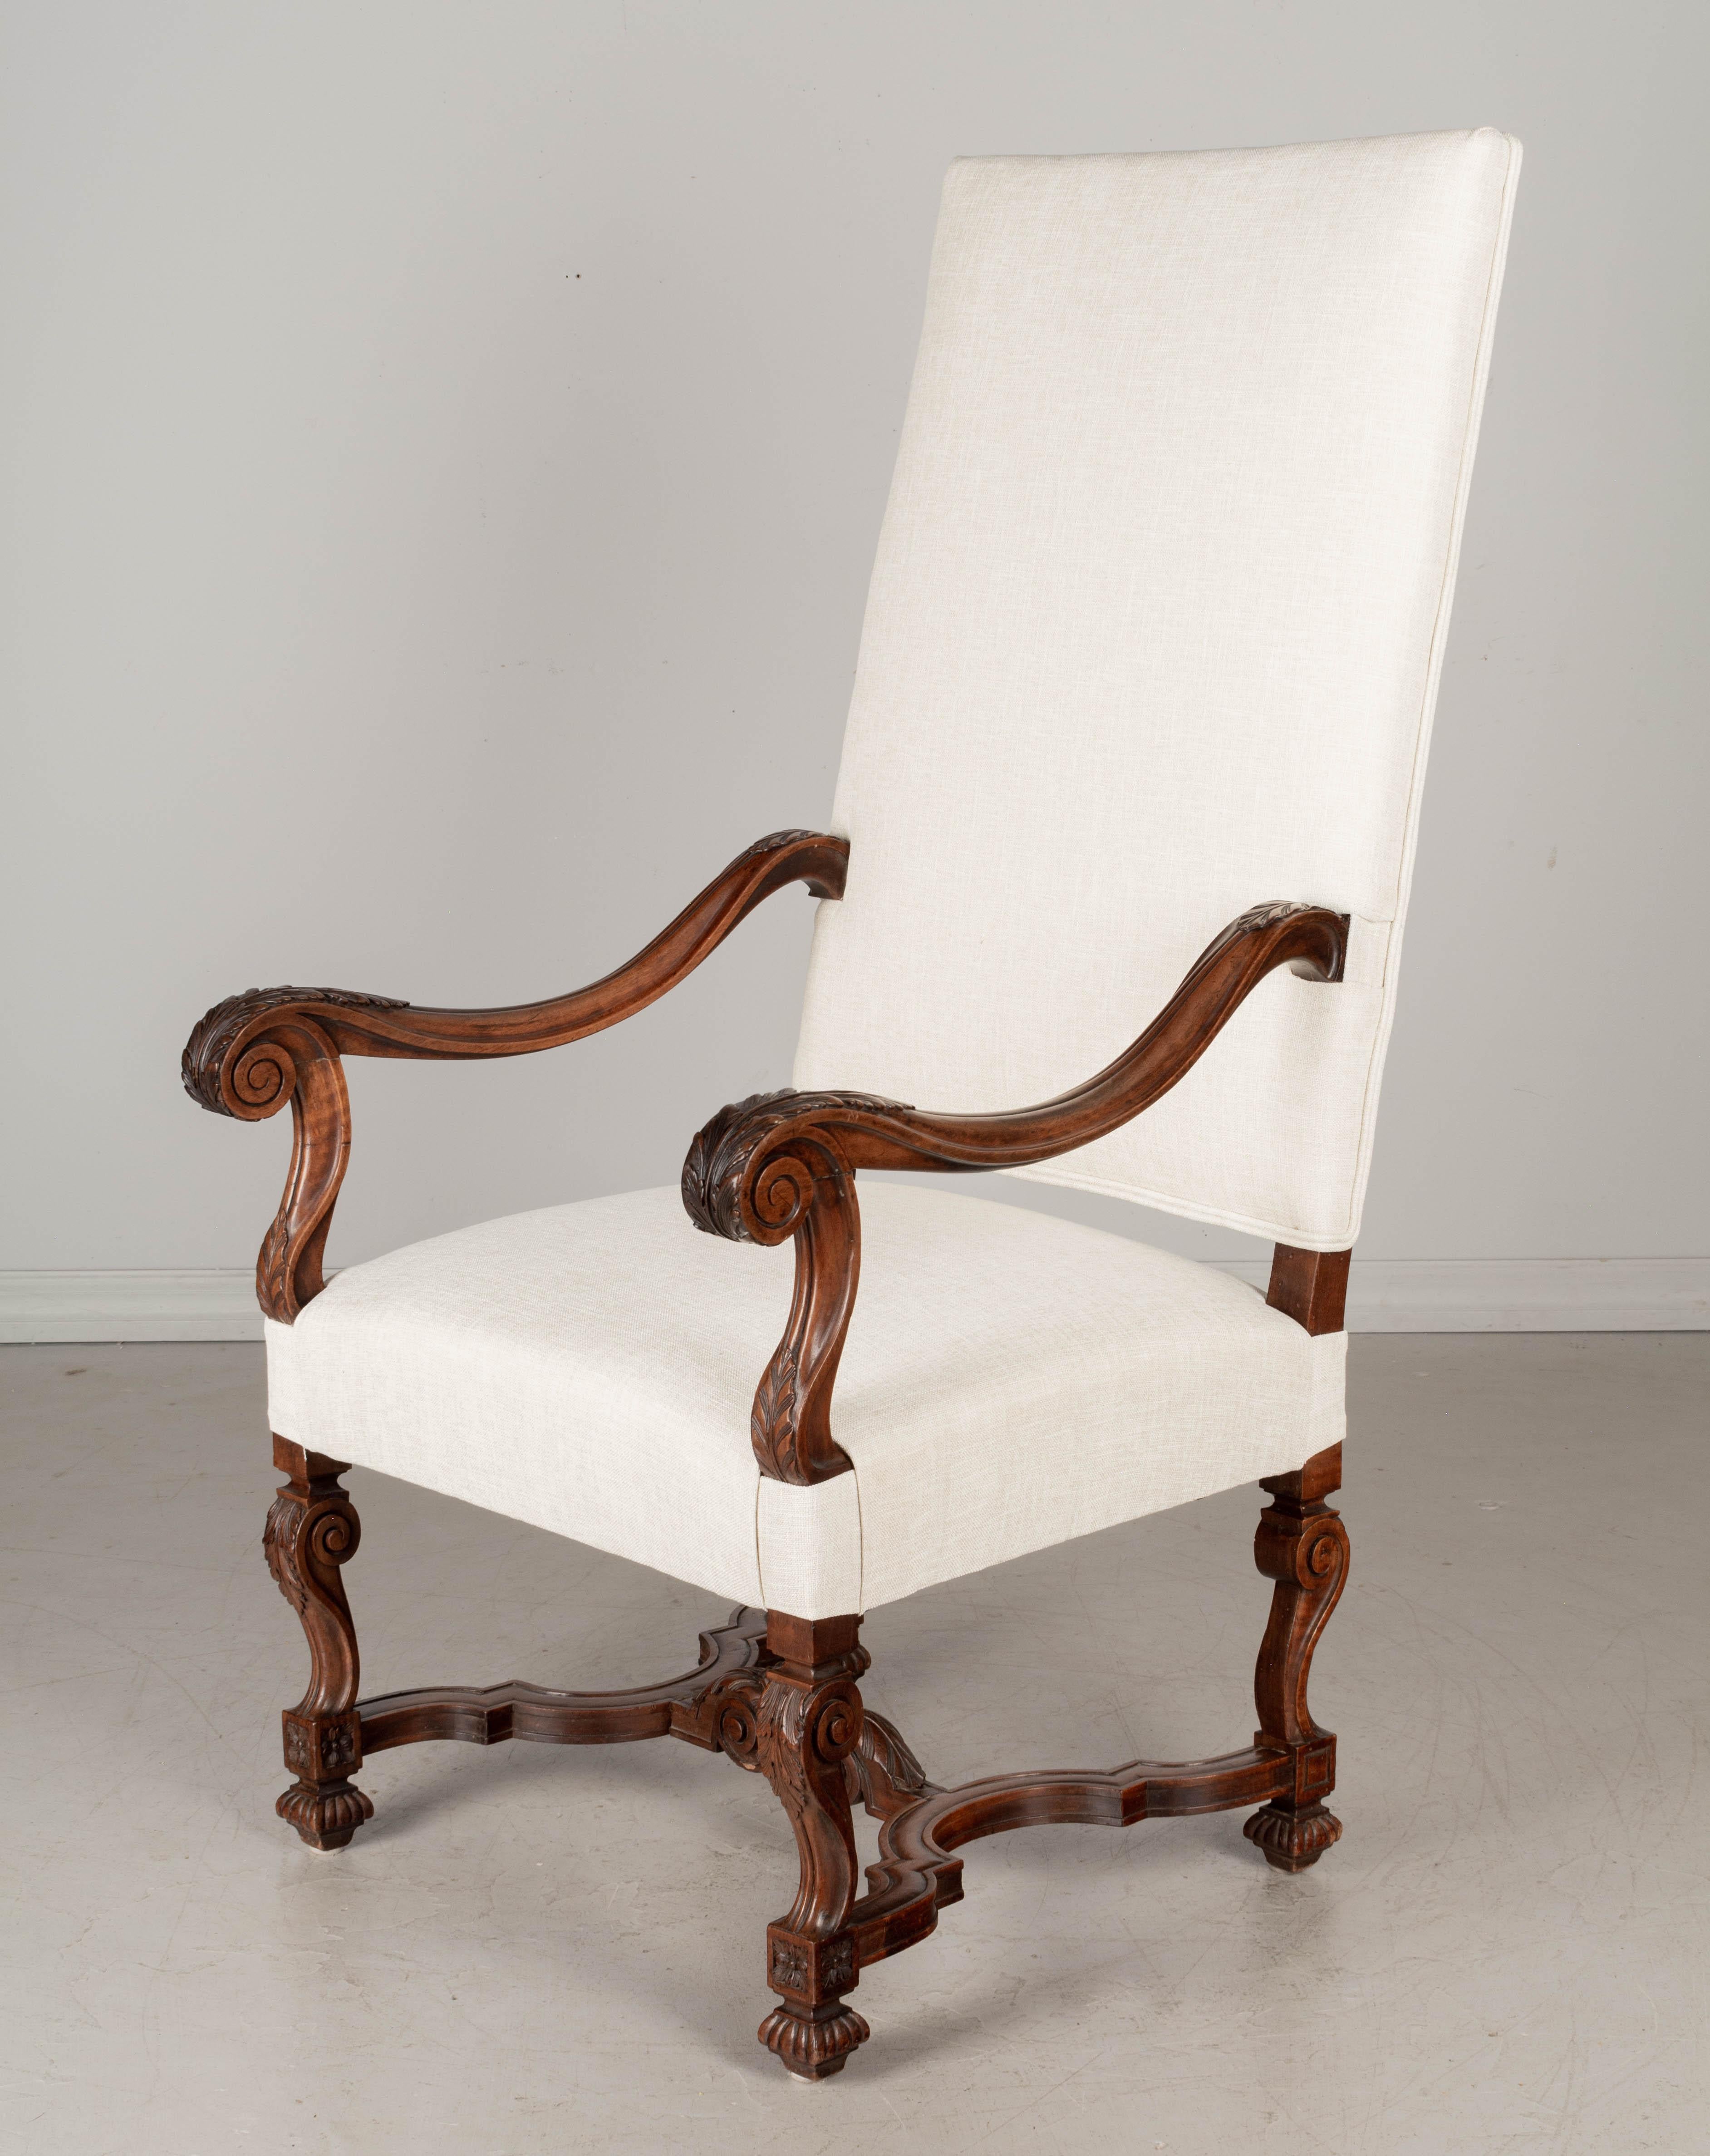 Upholstery 19th Century Louis XIII Style Fauteuil or Arm Chair